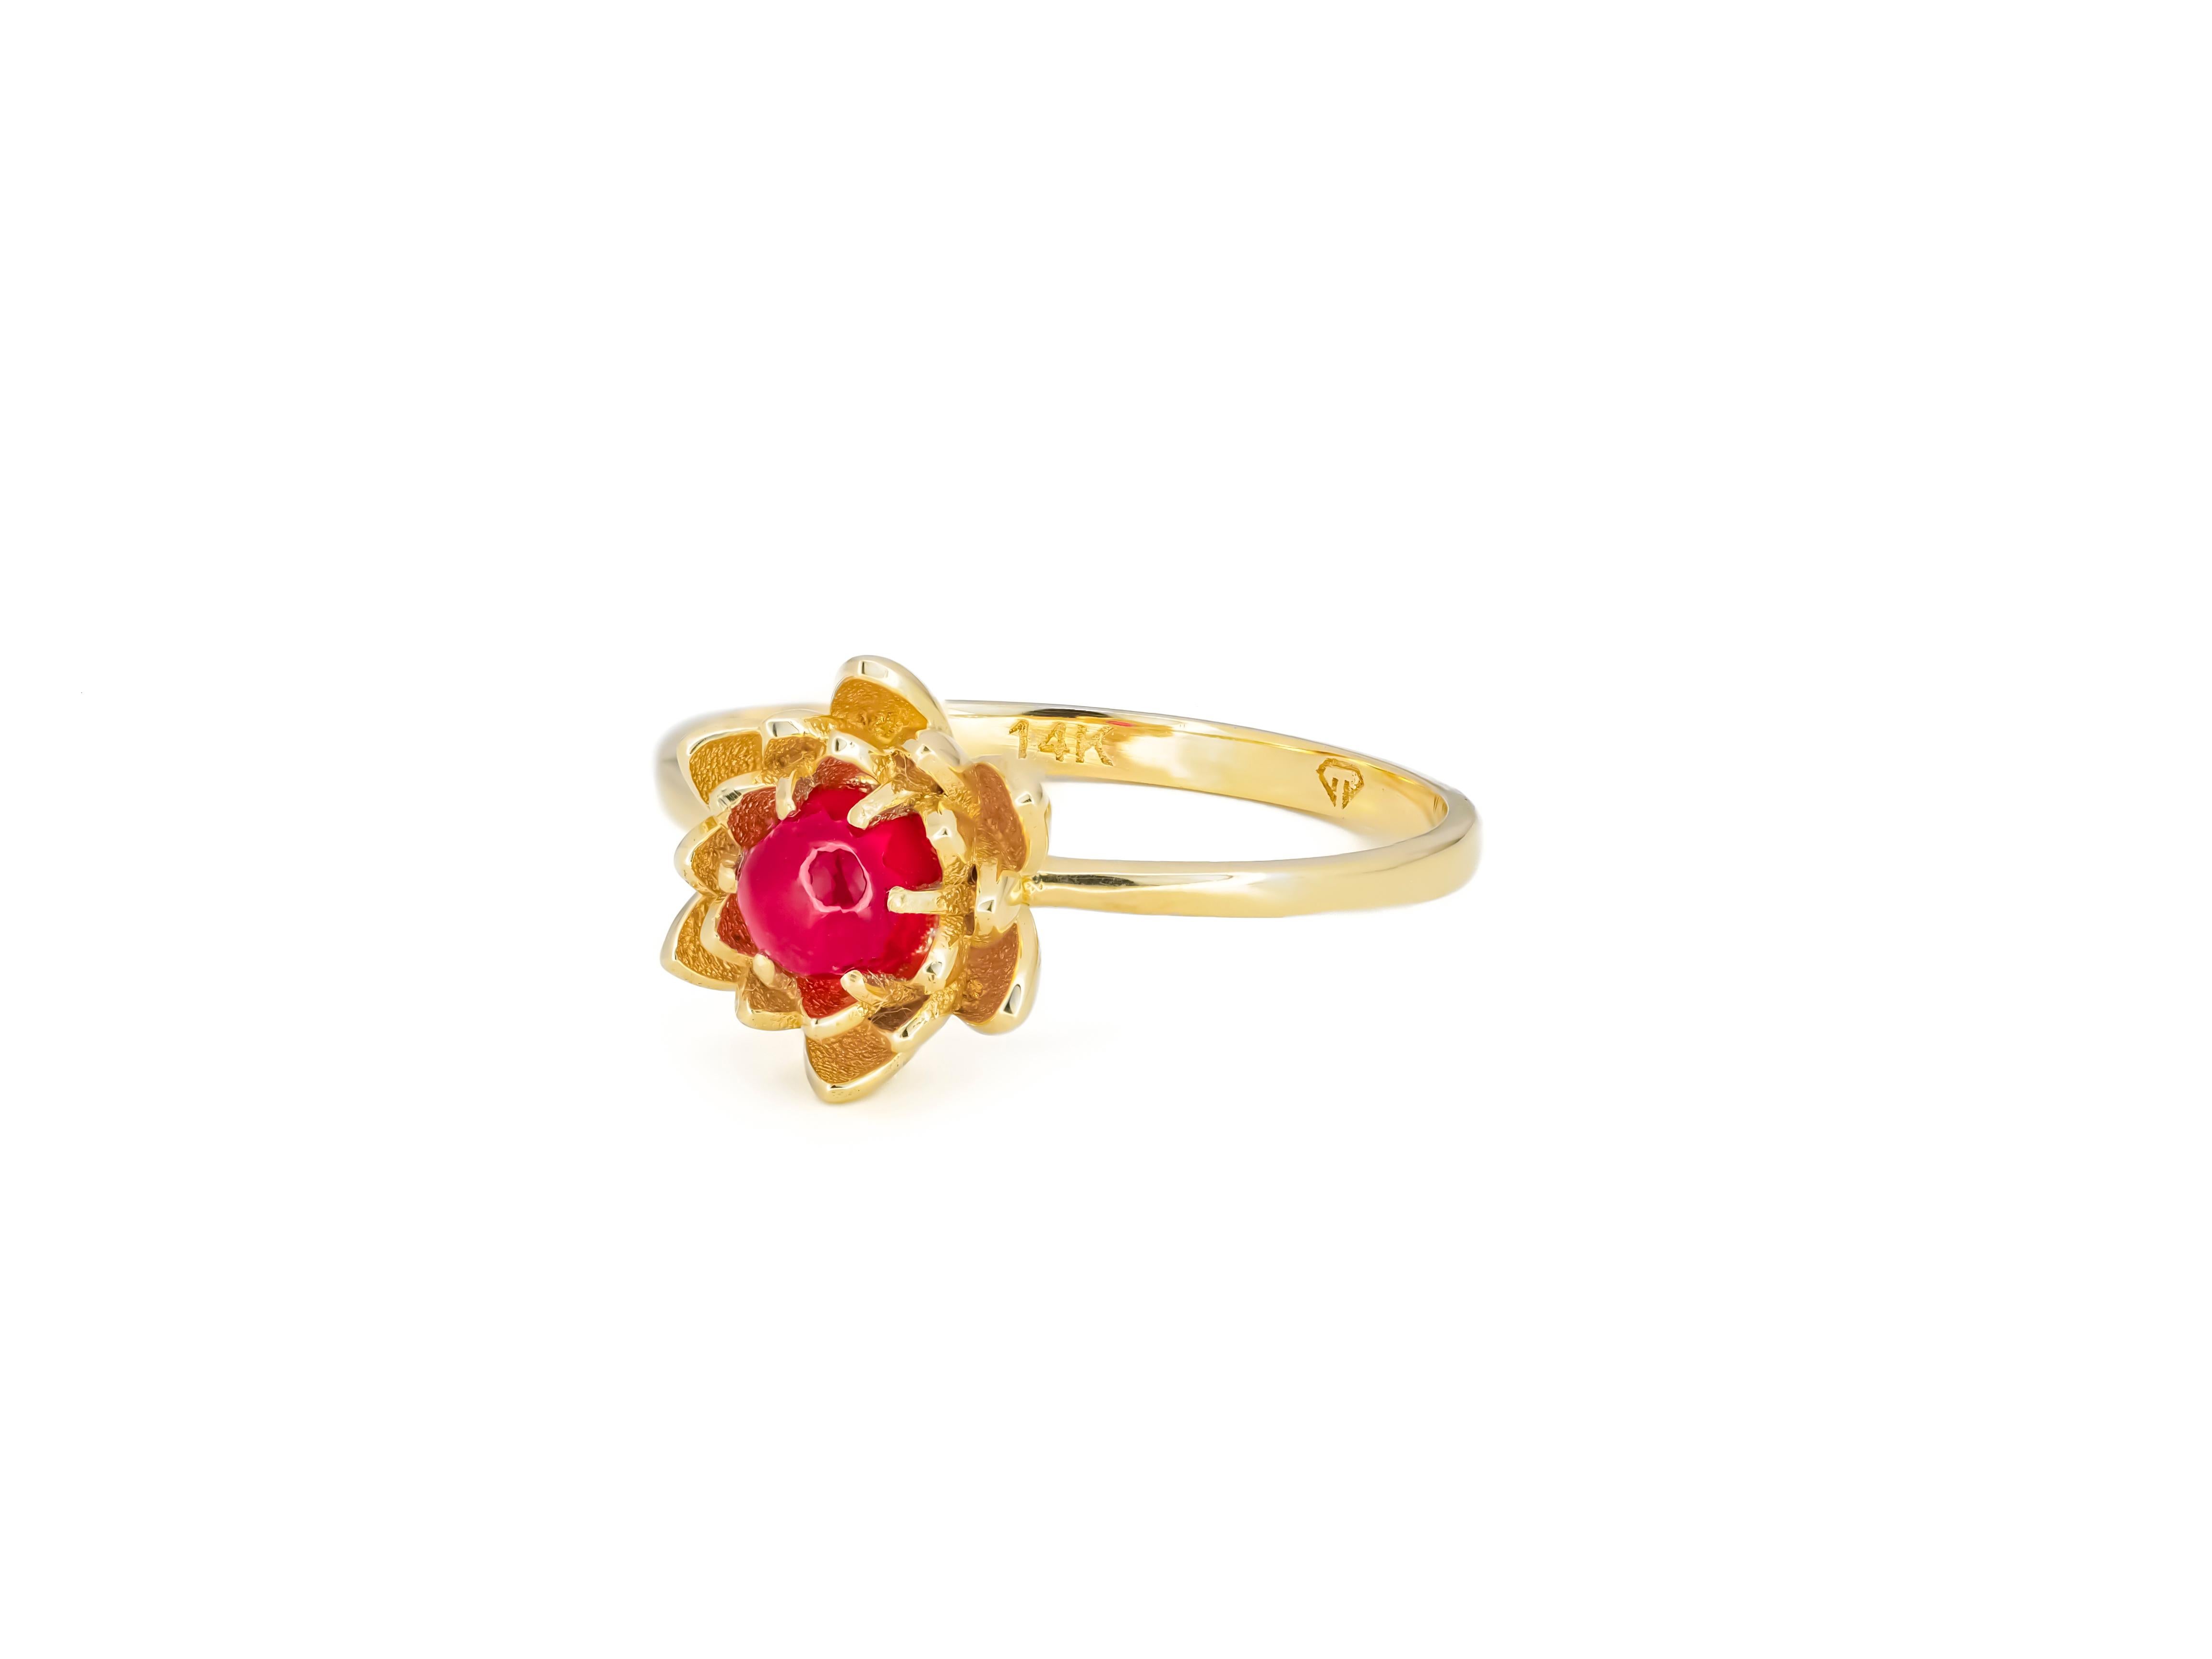 Round Cut Ruby Gold Ring in 14k Gold, Lotus Flower Ring, Ruby Cabochon Ring